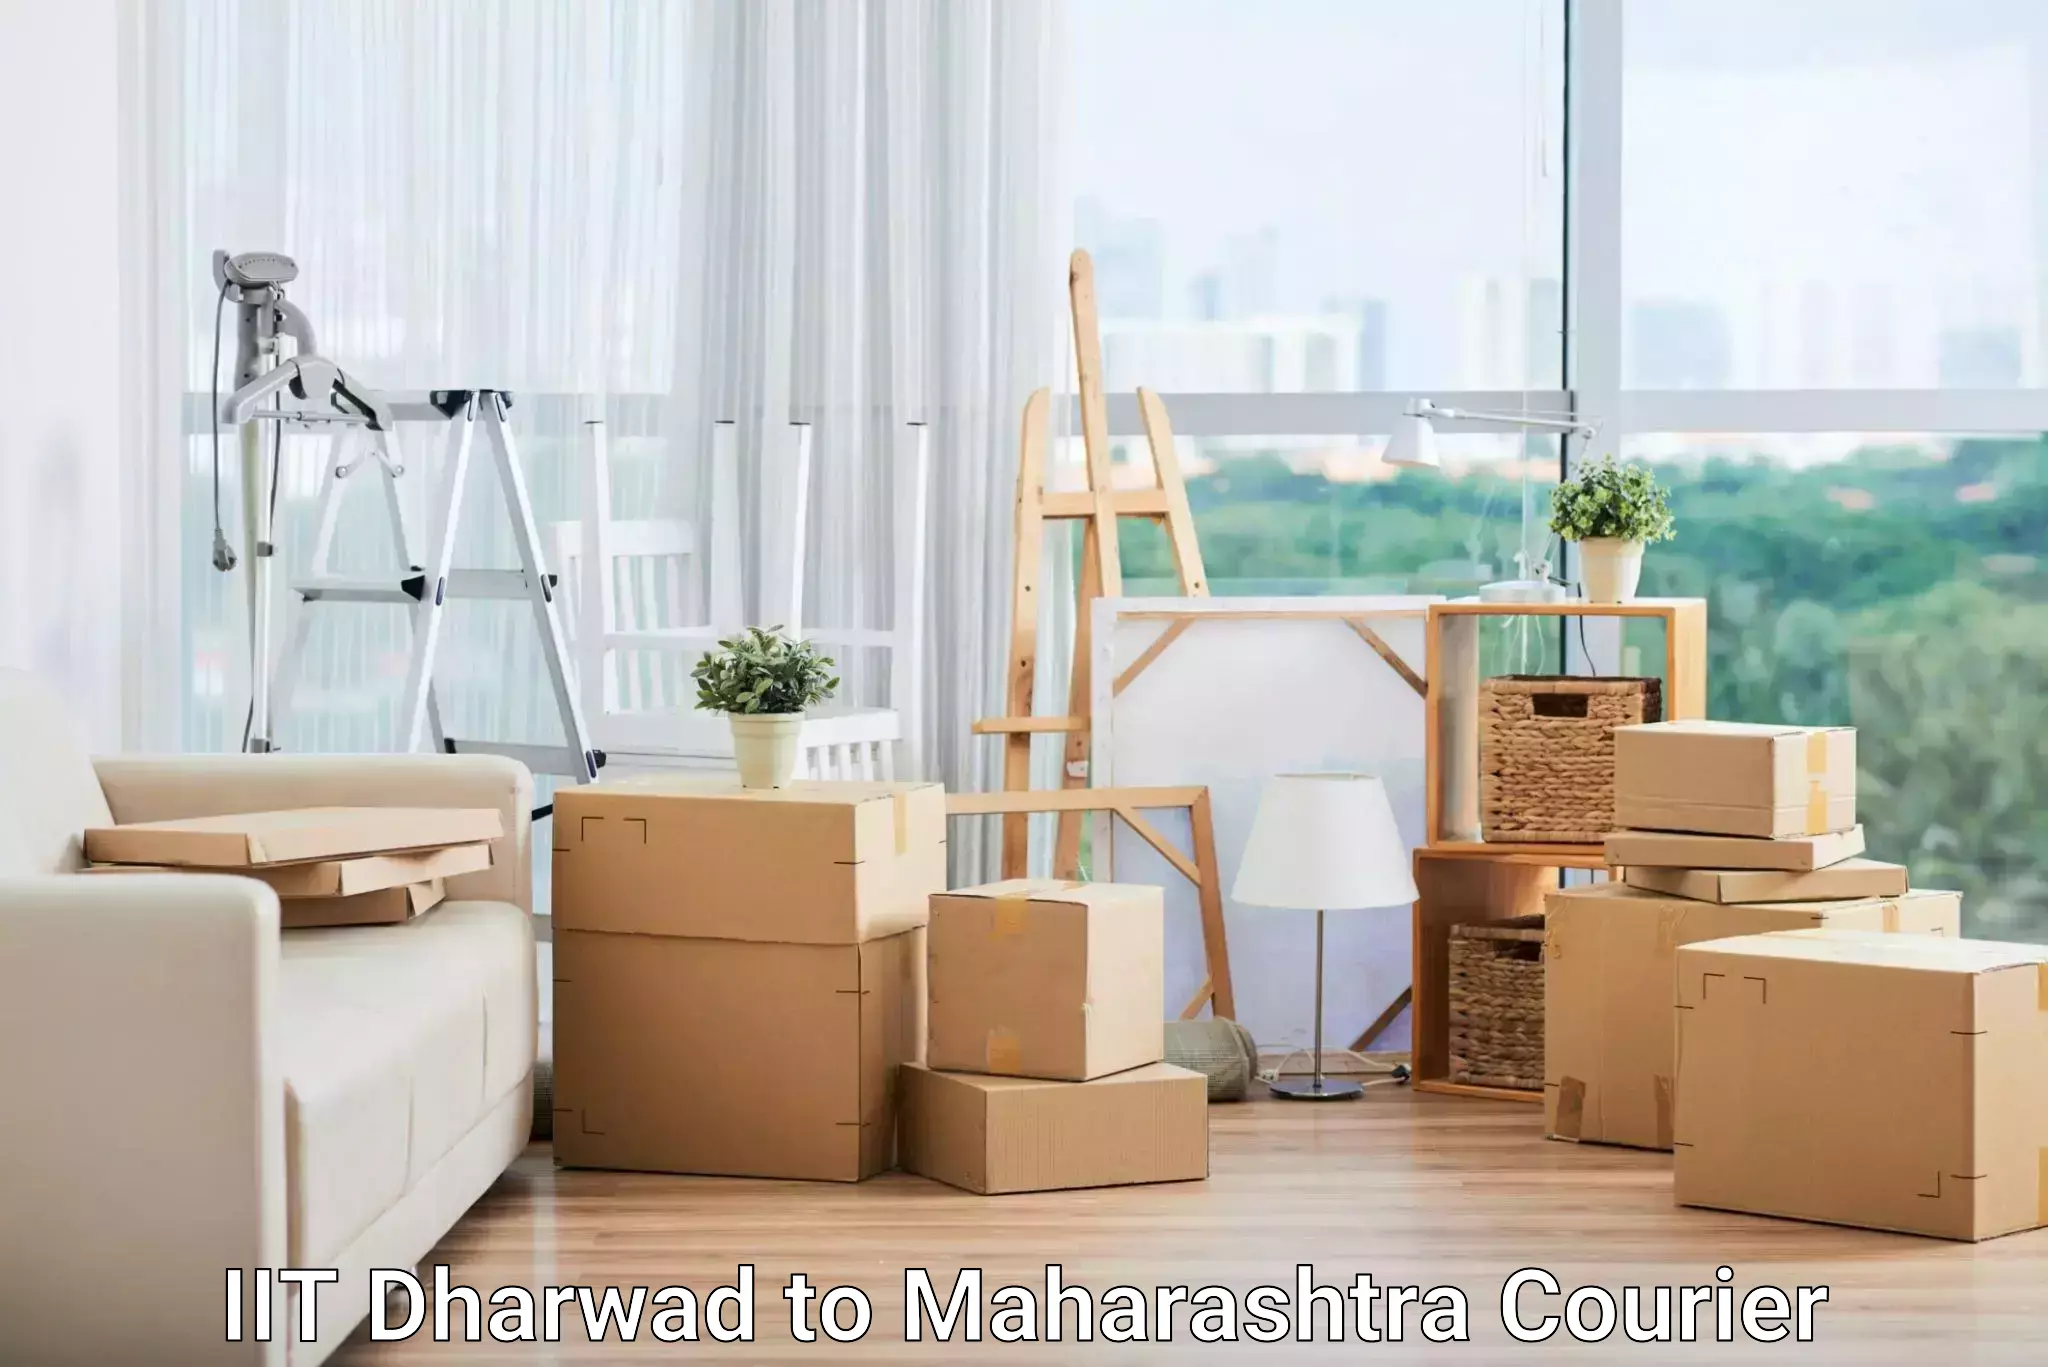 Same day shipping IIT Dharwad to SVKMs Narsee Monjee Institute of Management Studies Mumbai